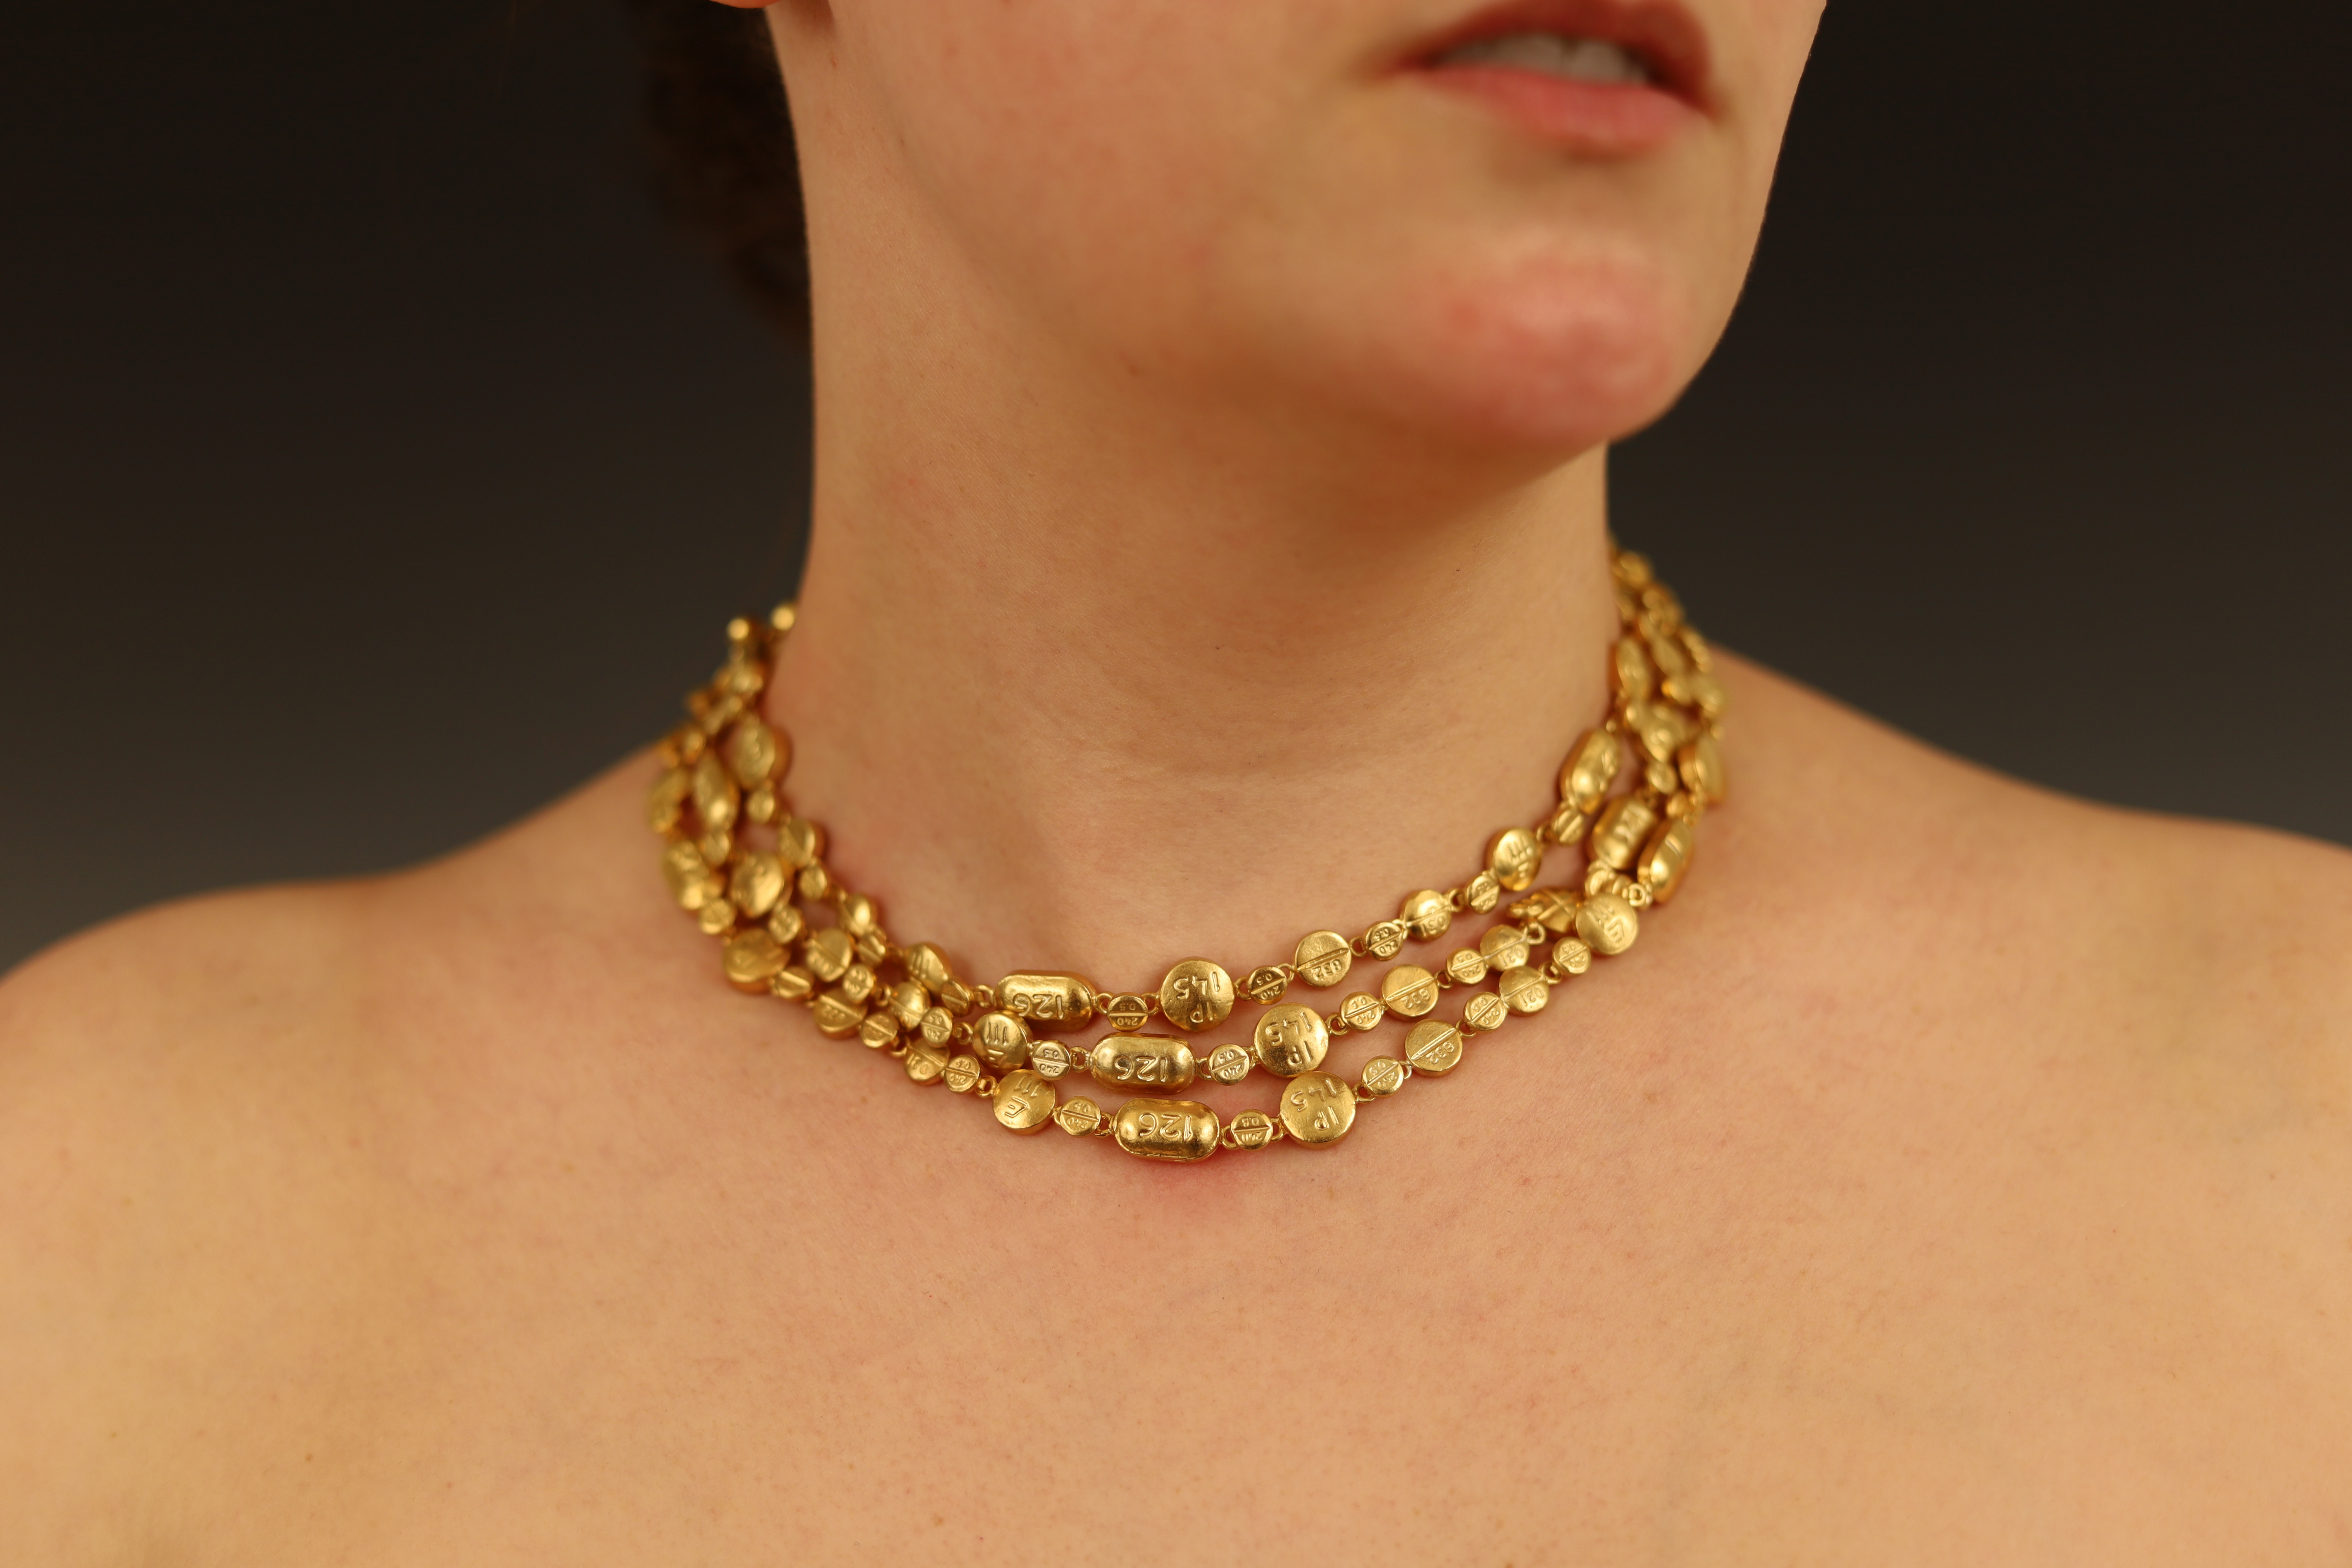 Image of a person's neck, wearing a gold chain necklace